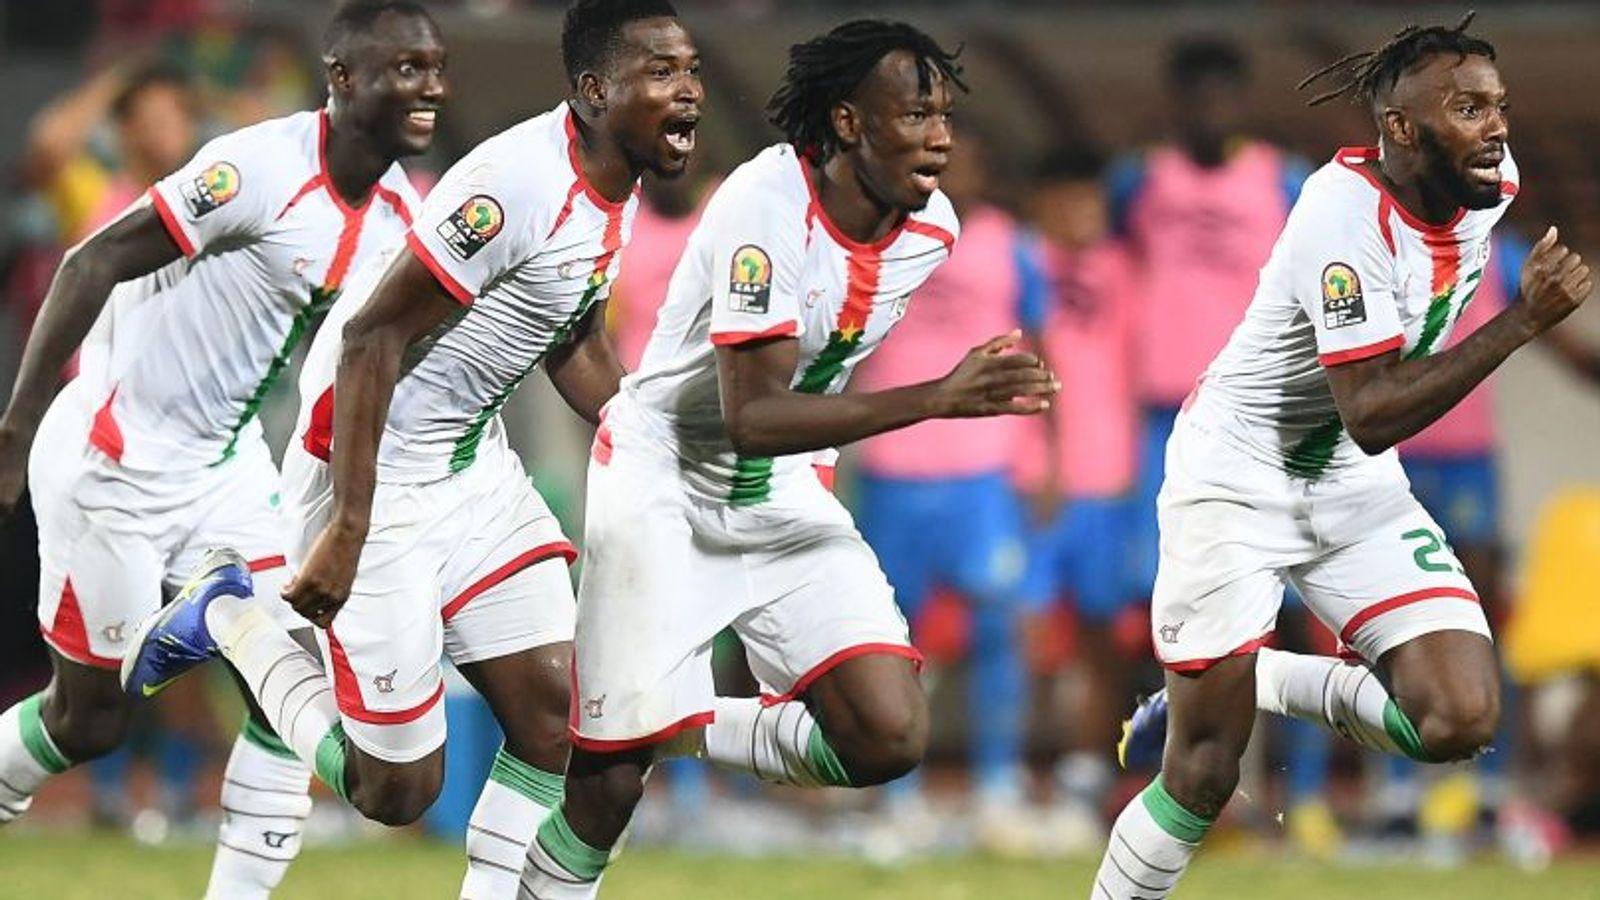 Burkina Faso beat Gabon 7-6 on penalties after 1-1 draw to reach AFCON quarter-finals